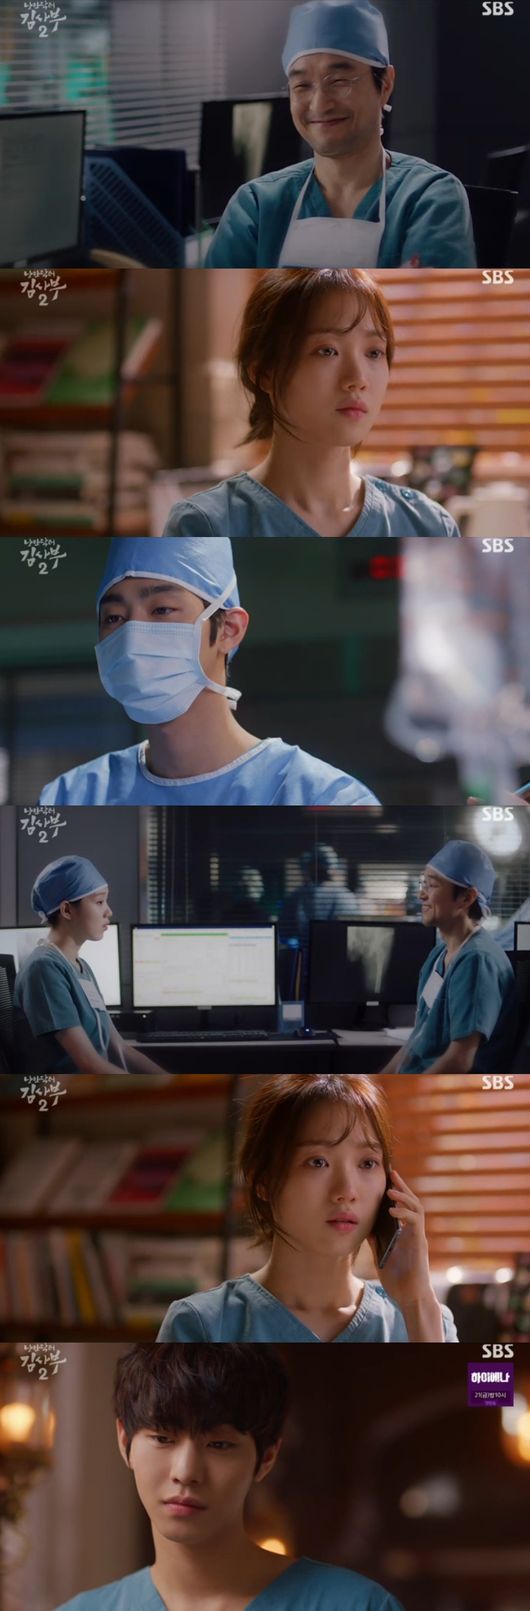 Lee Sung-kyung in Romantic Doctor Kim Sabu 2 completely overcame Nausea in Cheering of Ahn Hyo-seop following Han Suk-kyu.Eun-jae (Lee Sung-kyung) successfully performed his first surgery without medicine in SBS Wolhwa Drama Romantic Doctor Kim Sabu Season 2 (director Yoo In-sik, Lee Gil-bok, and Kang Eun-kyung) broadcast on the 17th.Woojin (Ahn Hyo-seop) again followed the debtors in secret to avoid damaging the debtors to the debtors, and to the silver (Lee Sung-kyung).Eunjae, who had been dealing with personal affairs, suddenly called Woojin, but Woojin was already taken to the debtors.11 hours ago, Woojin, who became Masters doctor, worried about when the Master would undergo formal surgery.The master was rather worried about Woojin, who did not enter the operating room, and Woojin soothed his concern that he was a grass problem with Park Min-guk (Kim Joo-heon).The emergency room at Doldam Hospital was busy with emergency patients, and a factory worker who had his legs cut off was screaming and suffering, and the master helped Moon Jeong (Shin Dong-wook) to start surgery.However, the patient refused to operate because of the cost of the operation. The master, who had been informed of the unfortunate situation, tried to contact the factory officials, but no one came.The patients guardian was in a fever, and the master also recommended surgery, but the patient was stubborn. The patient who gave up his legs because of money said, What do my arms do this?In an upset heart, the master shouted, Is it your father to say that? Who would sympathize with that? Is he going to live as a desperate father?Woojin, who saw this, thought, How far should we treat the patient, and how far should we look at their wounds?Park Min-guk blocked Woojins surgery, which complicated the situation at Doldam Hospital. Woojin informed the situation that emergency trauma patients were being pushed to stimulate Park Min-guk.Woojin said, I will take it until I get it. He waited for his surgery to be released.At this time, Park Min-guk called Woojin again.Park Min-guk said, Just take emergency trauma until the VIP surgery is over, do not bother my team anymore.Thanks to Woojin, he was back on the operating table.Eun-jae asked the master about the prescription of the drug, saying that his Nausea medicine was out, and he said that it was a digestive agent, and that it would be pressure Nausea when he consulted the neuropsychiatry.I do not need to feel the pressure that came from your body, the master said. I have done well and I will do well in the future.Eun-jae was speechless at the unexpected fact. Woojin went to the silver, and Eun-jae told Woojin this.Eunjae said, What do you do now? Woojin said, You can do what you did, you do not believe in digestives. Think of the answer.But he was again distressed by Nausea, and Woojin, who noticed it, deliberately called him. He was again in a fight with himself.Woojin gave the courage to Eunjae, saying, There are many surgeries you have done in the meantime, what are you afraid of? Eunjae caught up with the surgeries he succeeded in and the encouragement of Kim Sabu.She was brave and was on the operating table for the first time without drugs. Kim looked at her from afar.Woojin said to the nervous silver dont be afraid and do it and from behind, the master shouted concentration; the silver master performed the surgery in the twos Cheering.Woojin and Eunjae jointly discovered the problems of the surgery and successfully completed the surgery, and the master smiled at this appearance.After completing the surgery, Eunjae went to the operating room with Kim Sabu.Kim said, Lets make sure this patient walks. After the surgery, Woojin succeeded in the operation with the master and completely overcame Nausea.Romantic Doctor 2 captures the broadcast screen